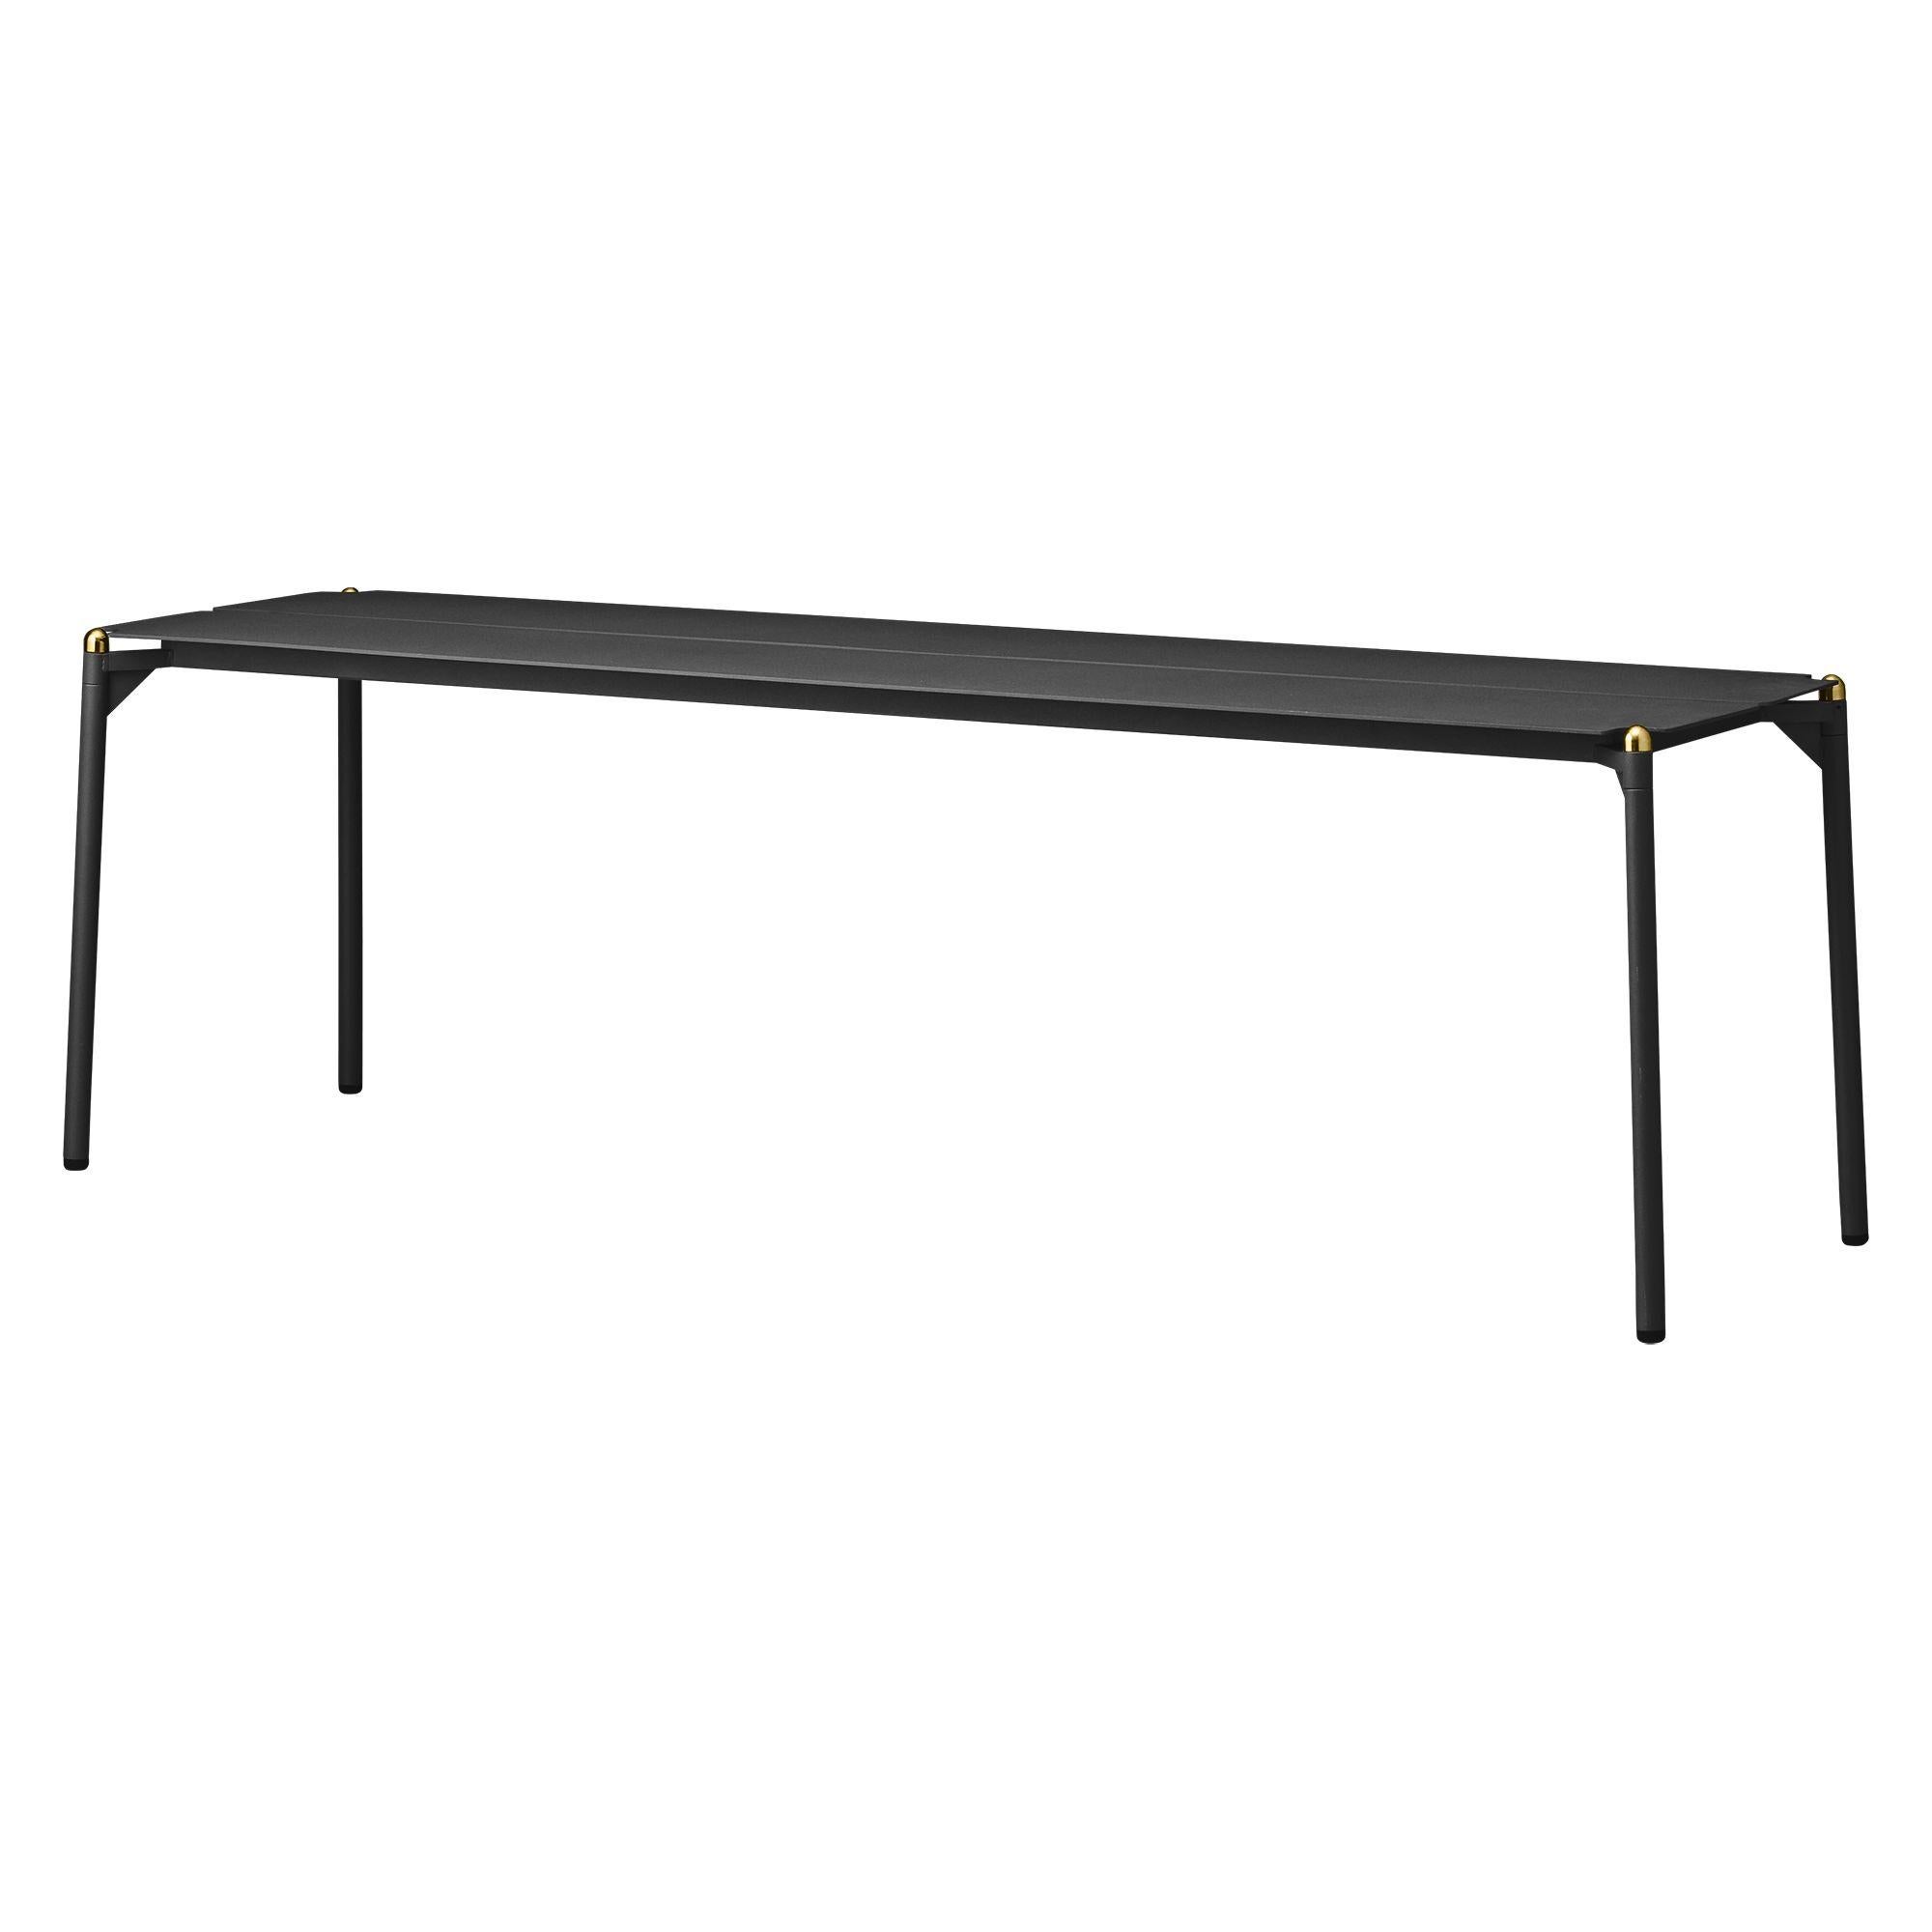 Black and gold minimalist bench
Dimensions: D 145 x W 43.3 x H 45.5 cm 
Materials: Steel w. Matte powder coating & aluminum w. Matte powder coating.
Available in colors: Taupe, bordeaux, forest, ginger bread, black and, black and gold. 

With